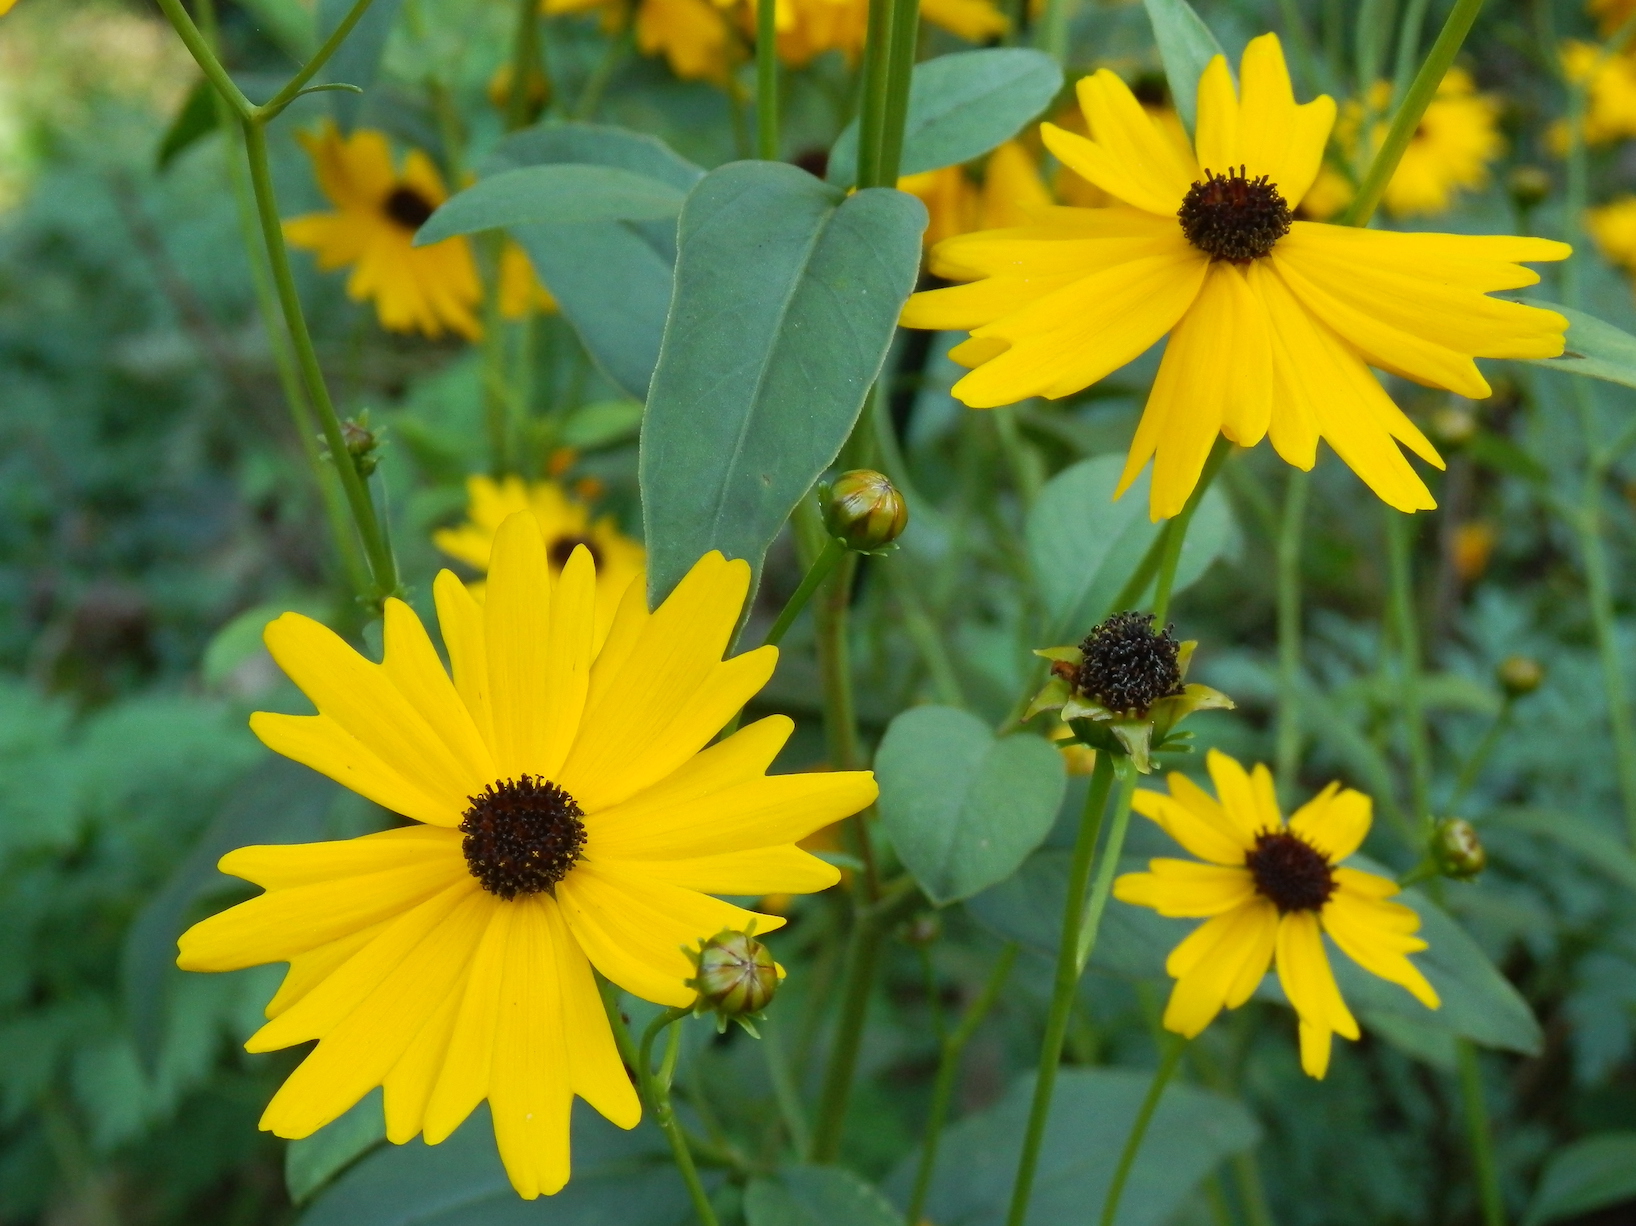 The Scientific Name is Coreopsis gladiata. You will likely hear them called Swamp Coreopsis, Coastal Plain Tickseed. This picture shows the The charming flowers have yellow rays with three teeth and purple disk flowers. of Coreopsis gladiata